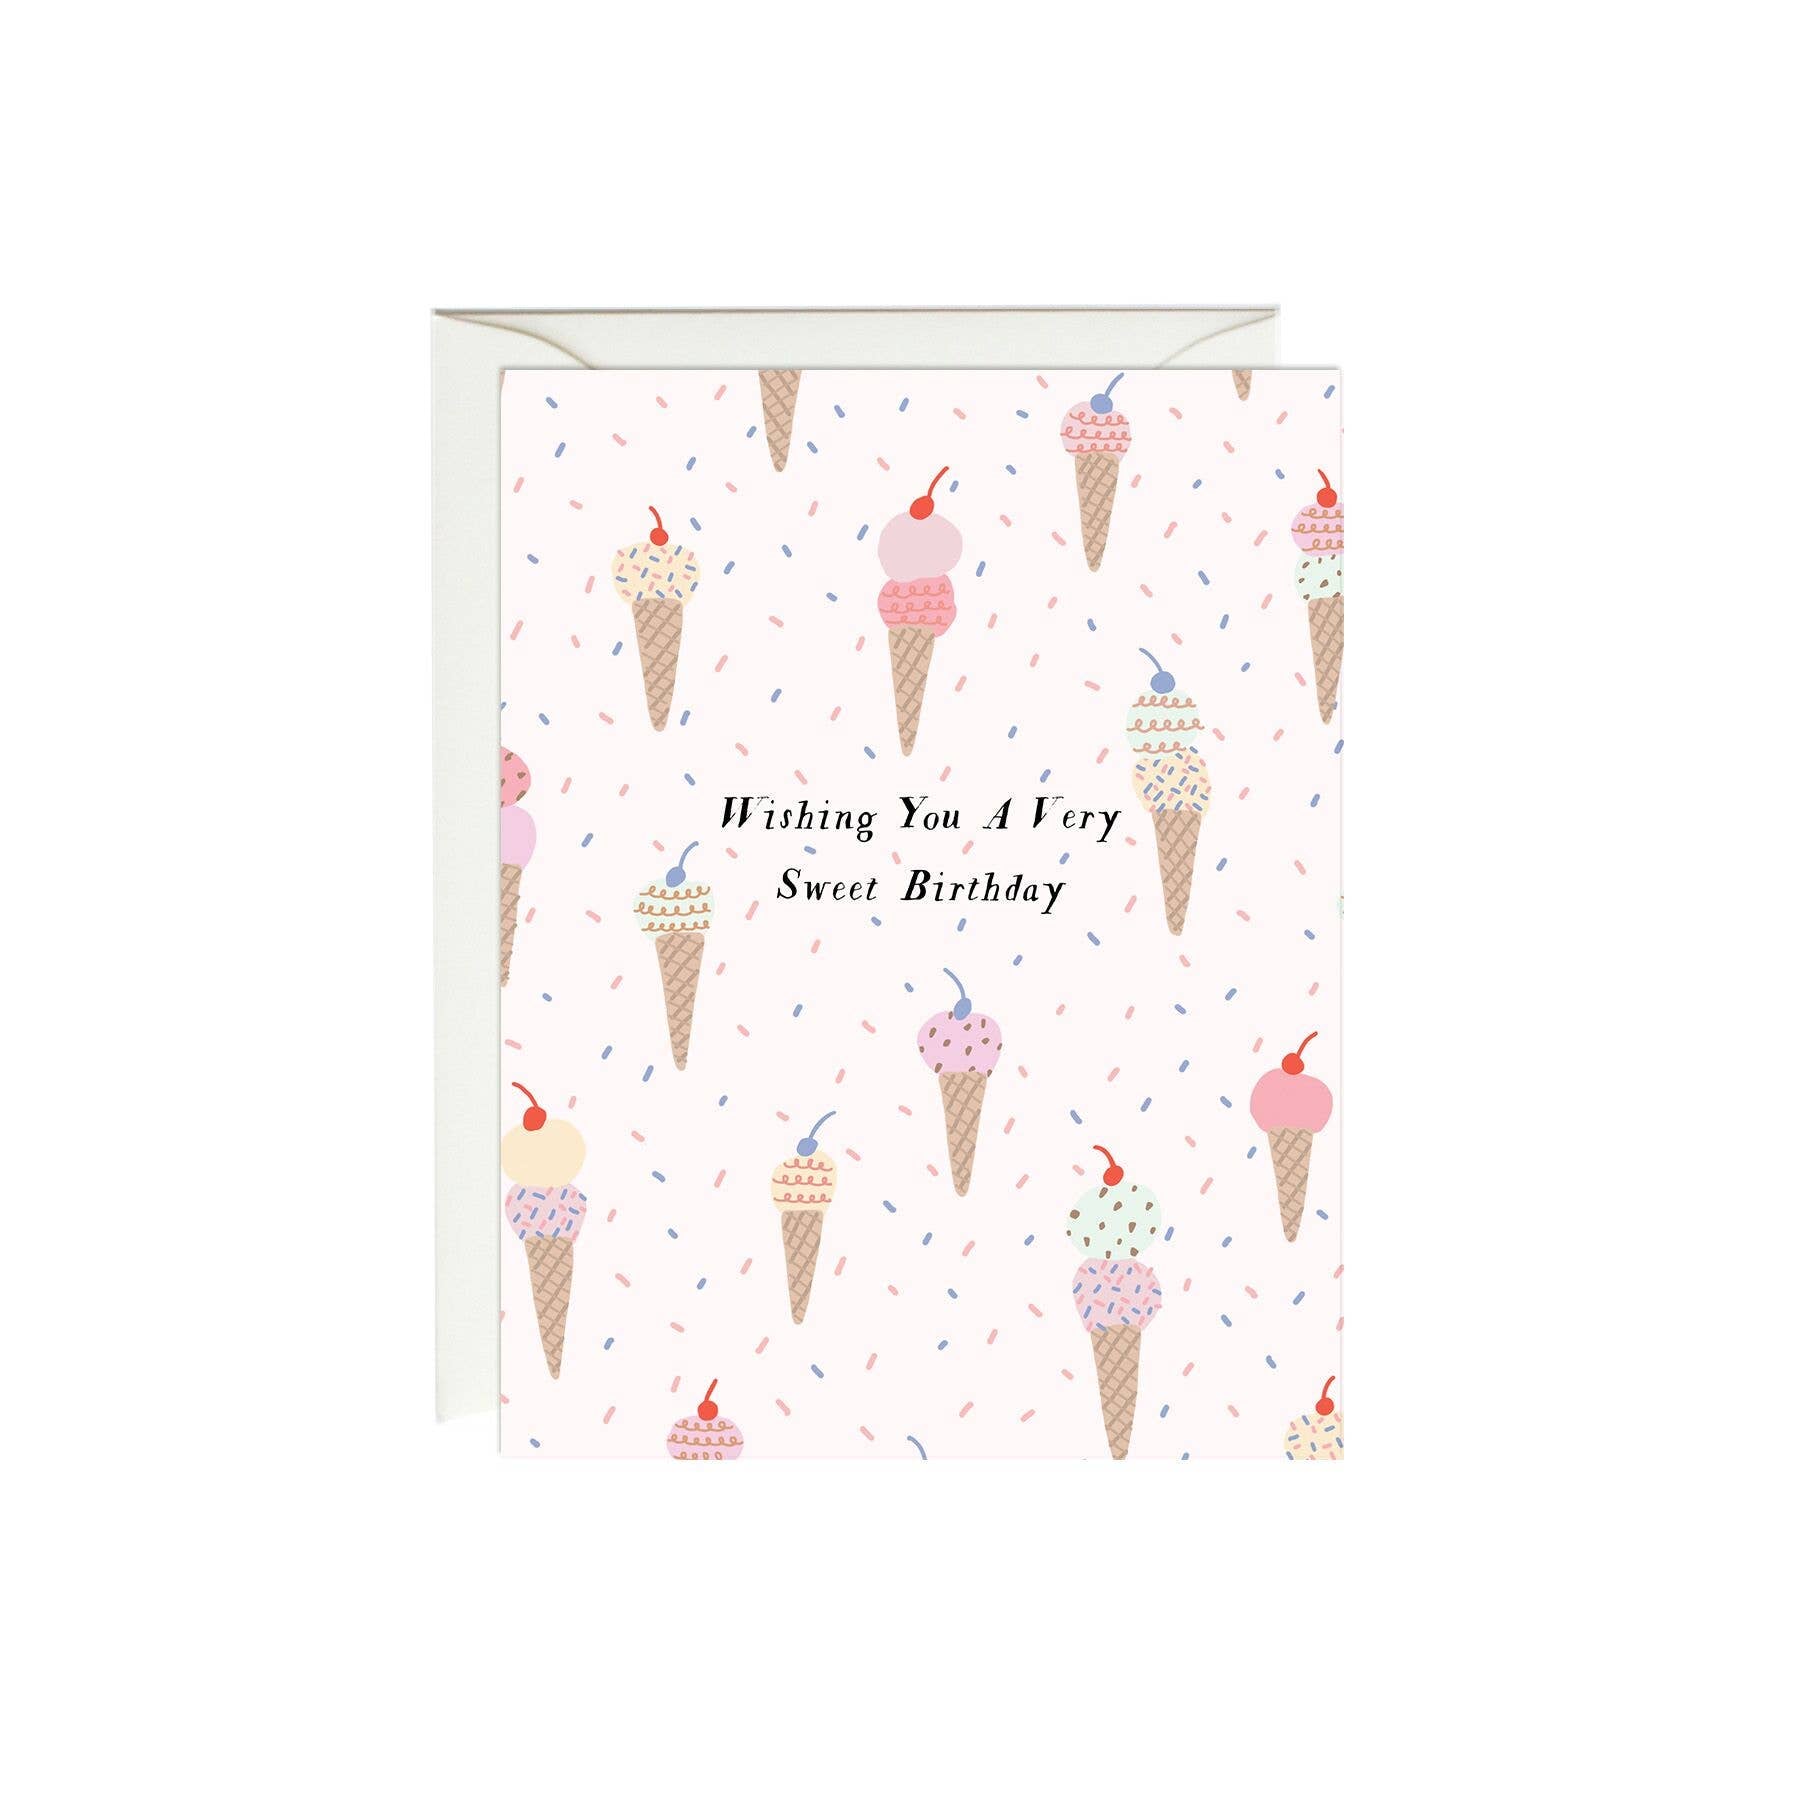 Birthday greeting card that reads "Wishing you a very sweet birthday" and has ice cream cones all over